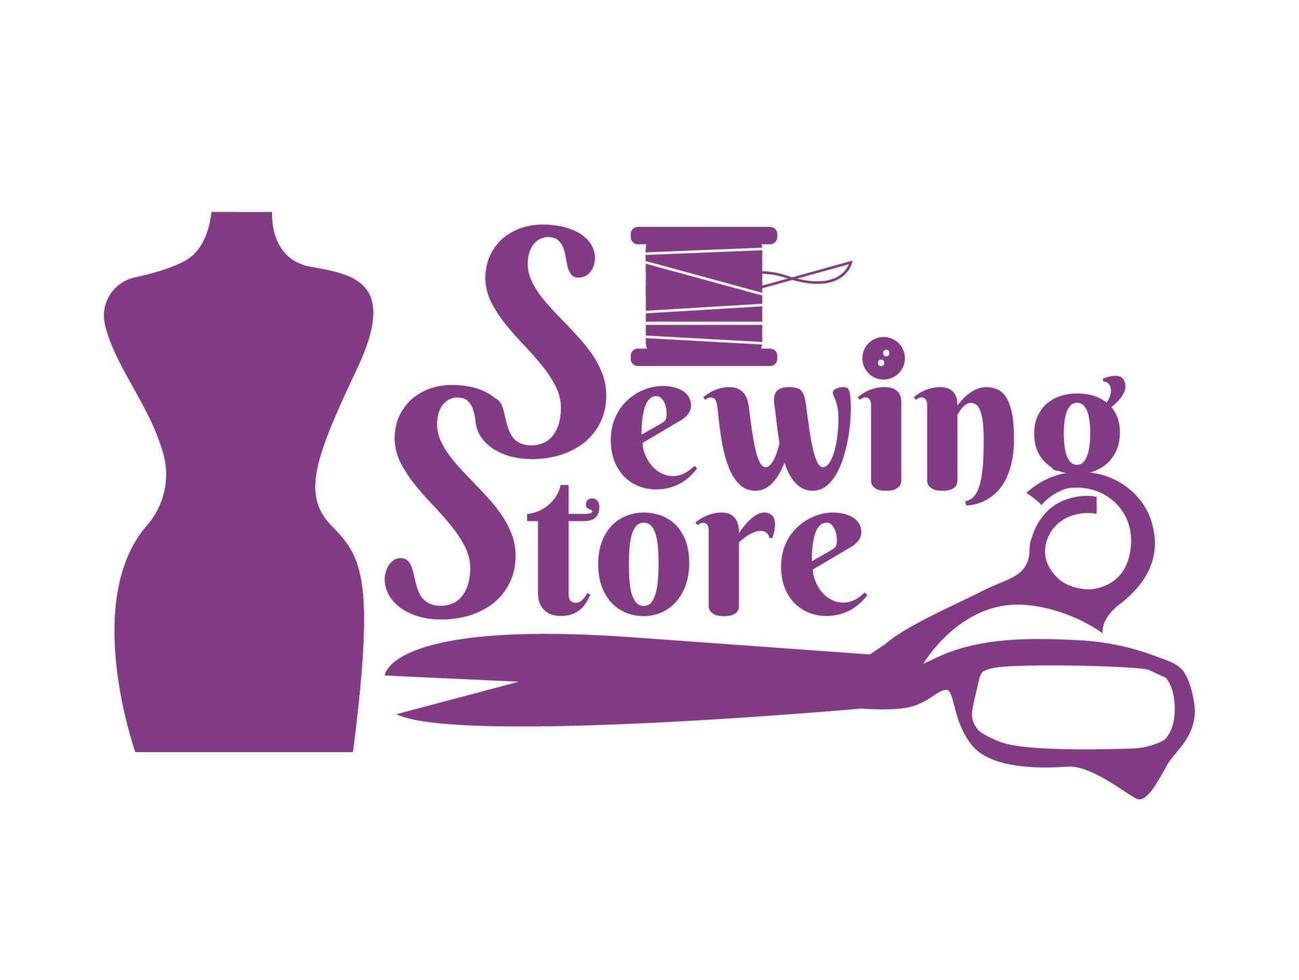 Template for logos, labels, emblems with thread and needles. Sewing store. Vector illustration.